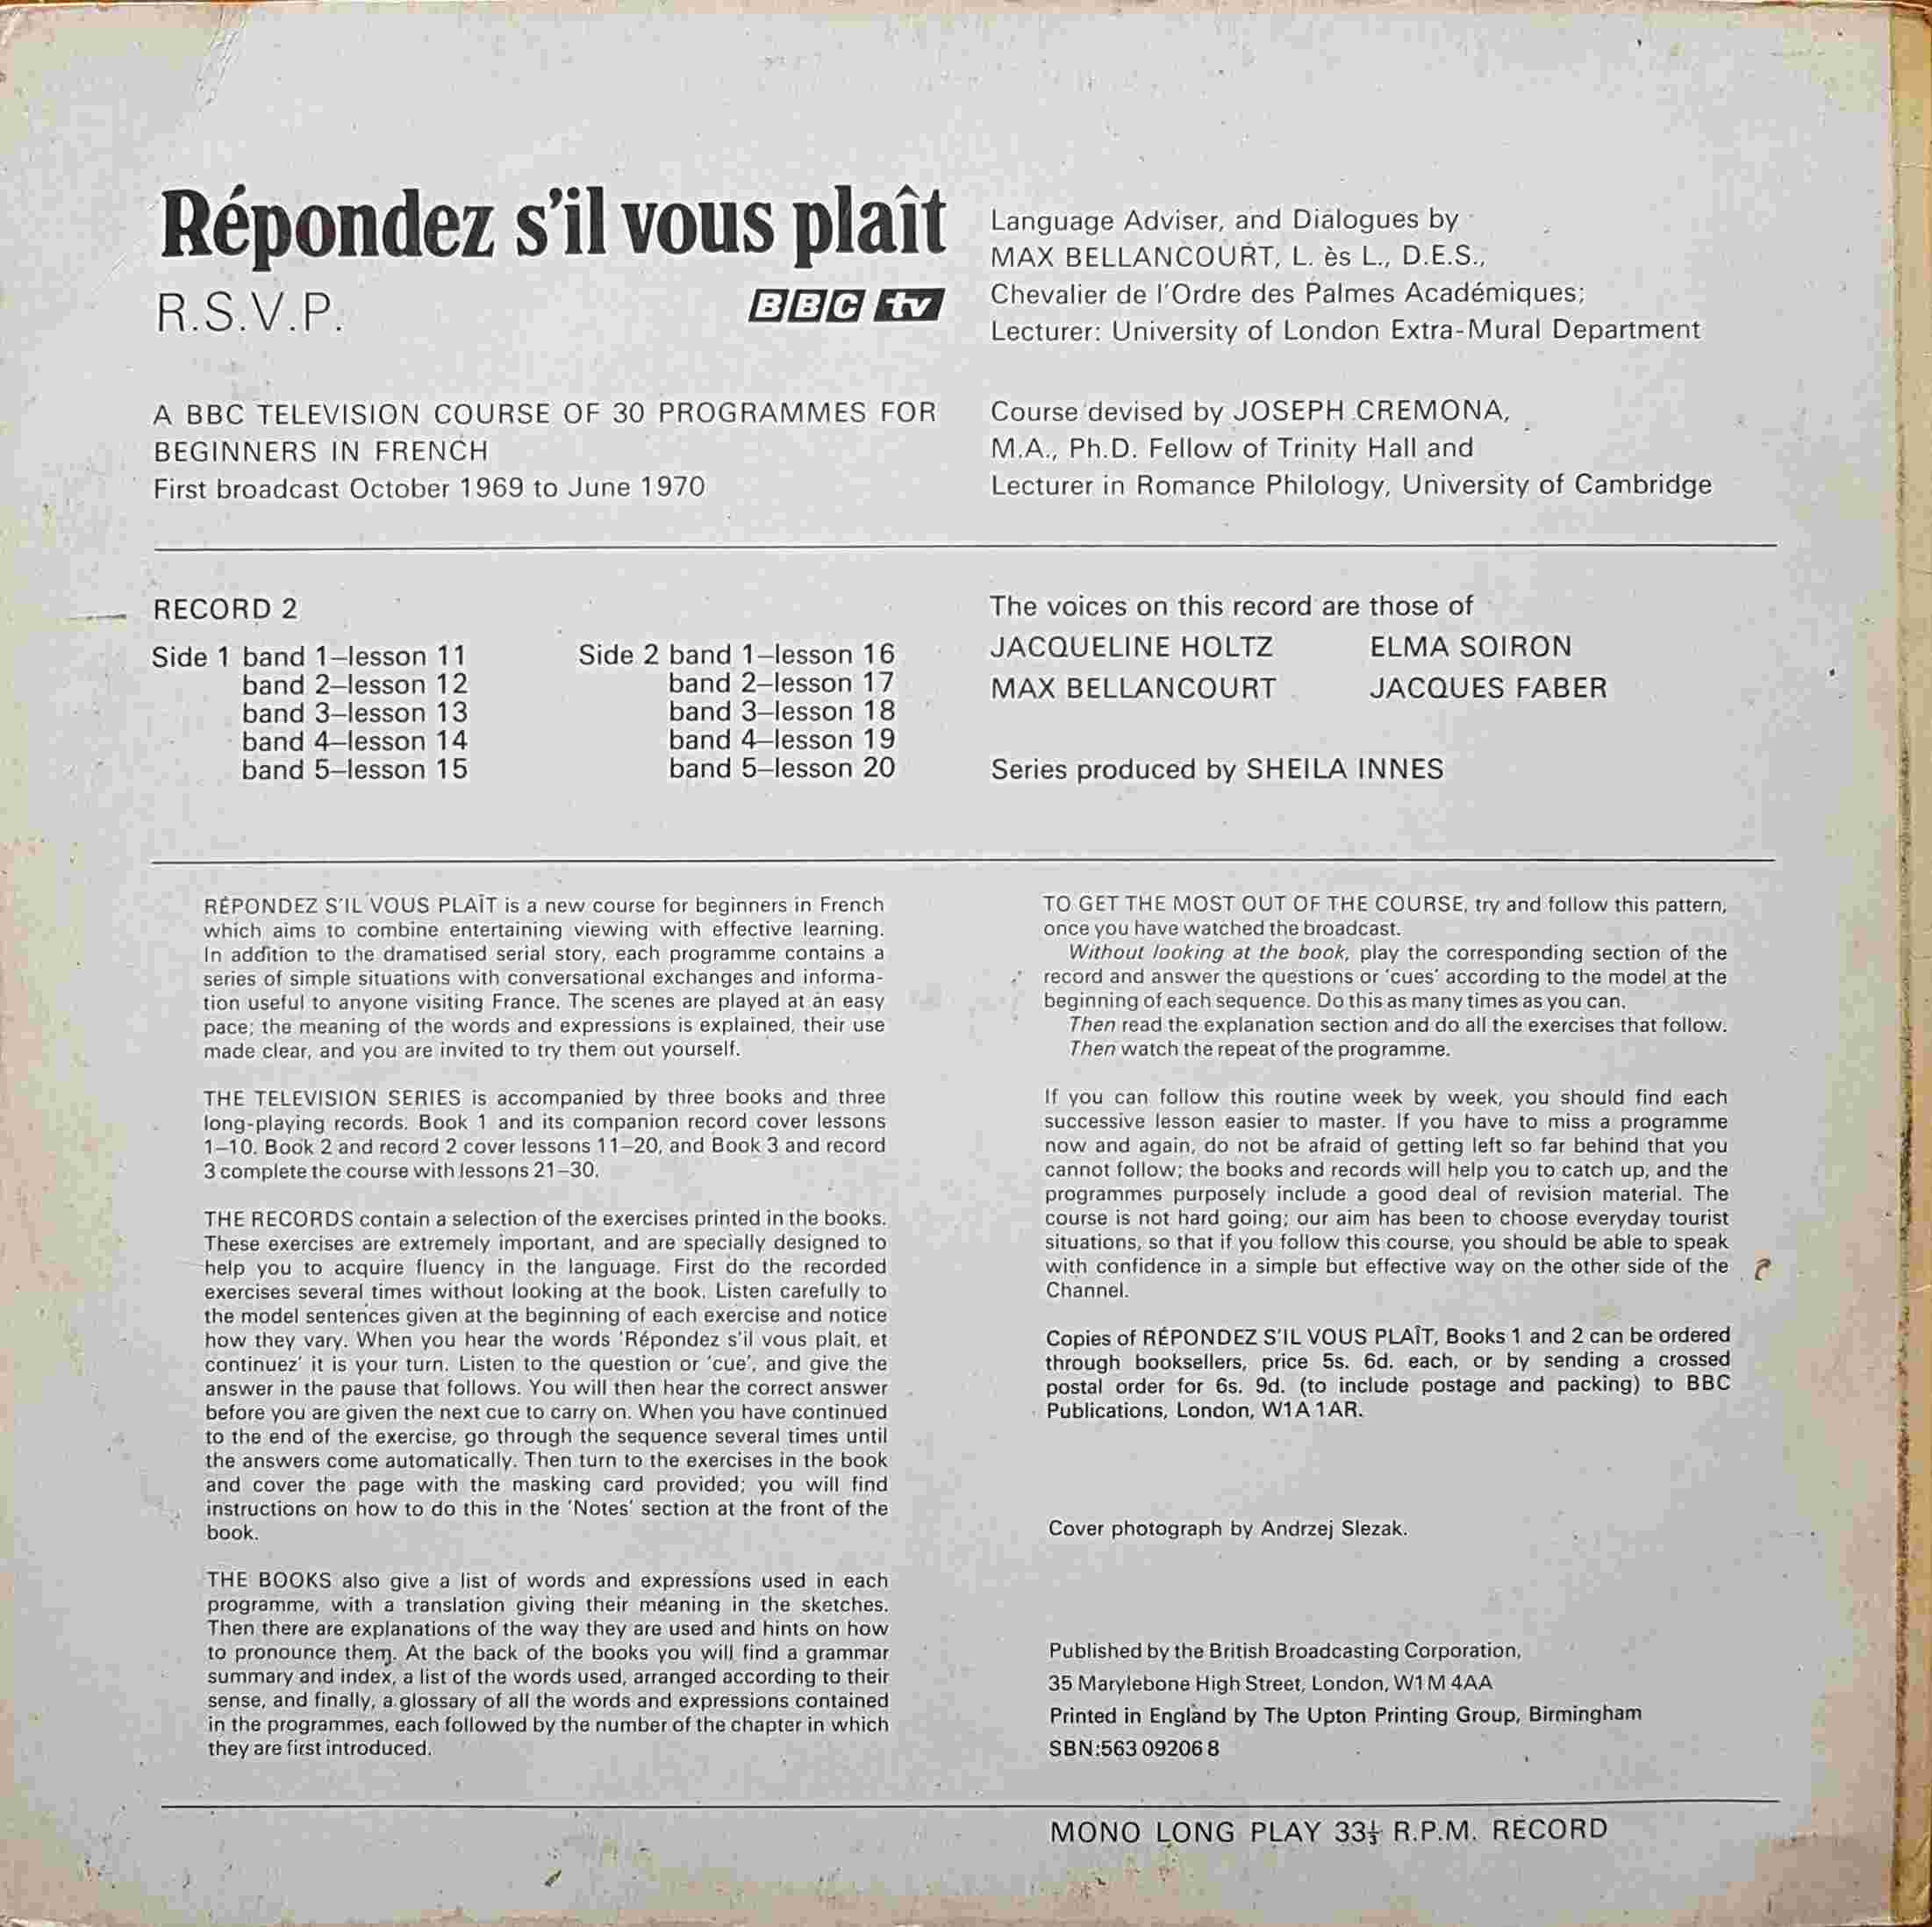 Picture of OP 141/142 Respondez s'il vous plait R. S. V. P. - Lessons 11 - 20 by artist Max Bellancourt / Joseph Cremona from the BBC records and Tapes library